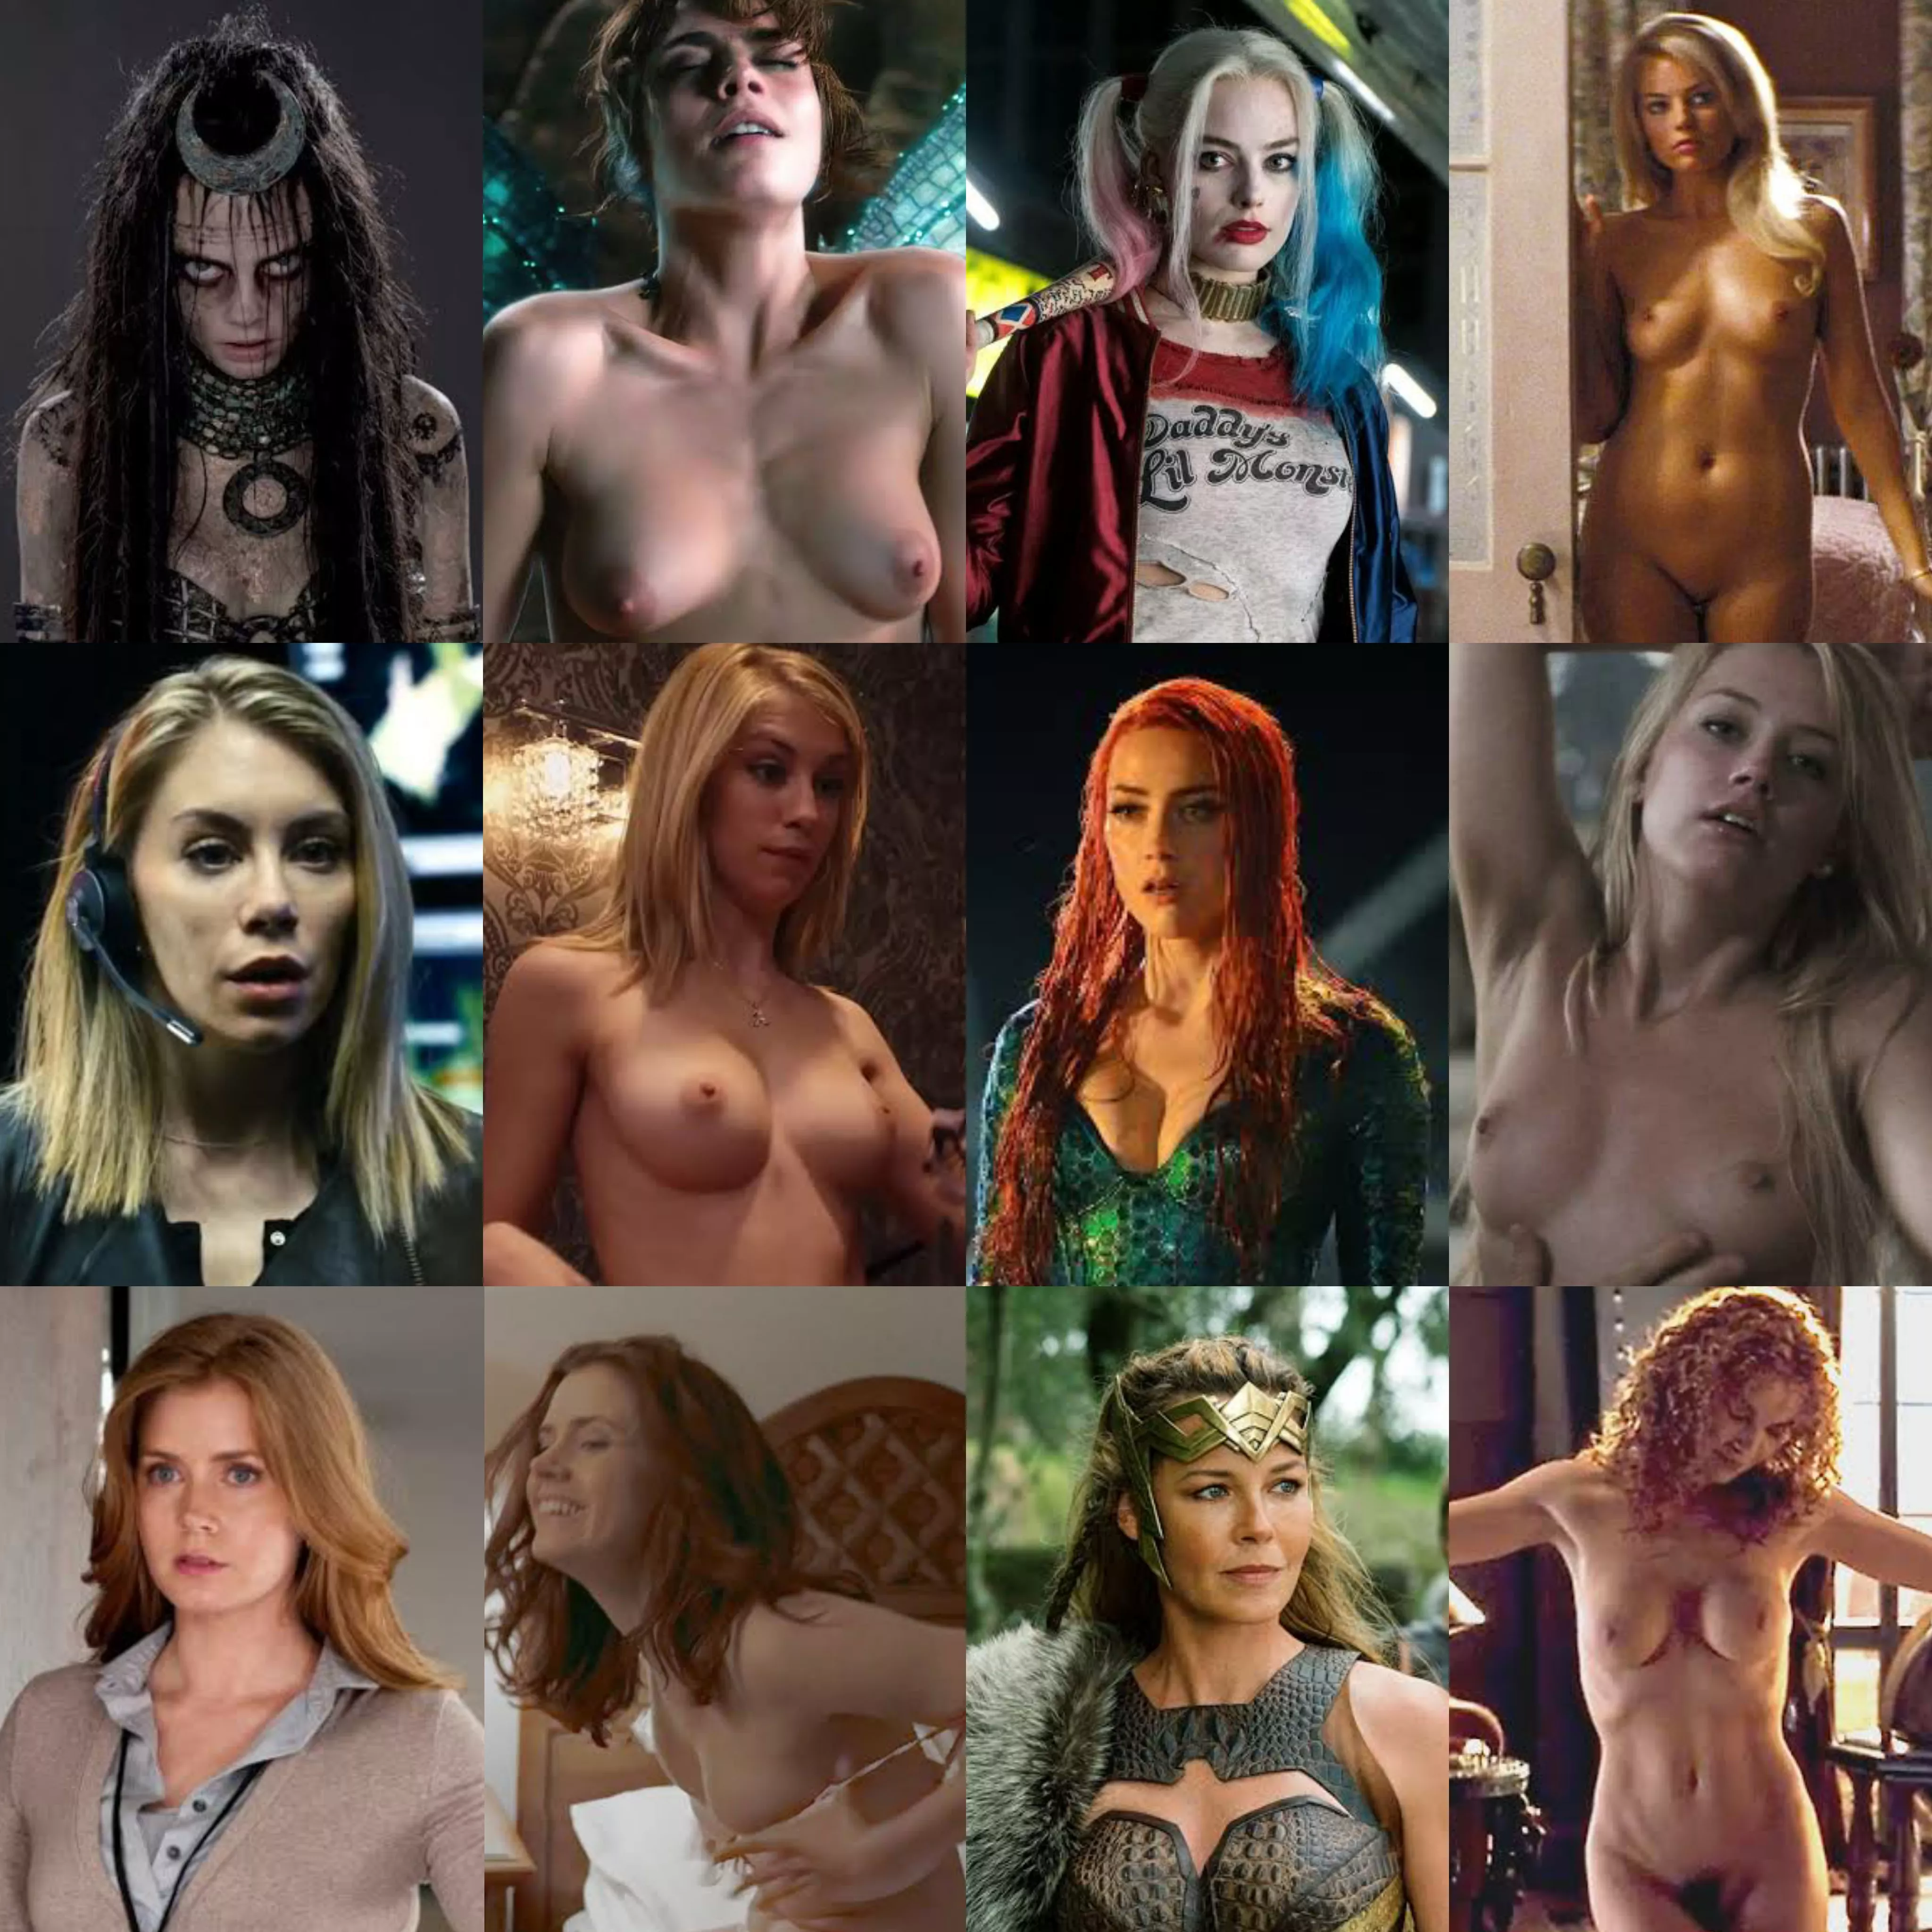 Some fine ladies of the DCEU (On/Off) [From Left to Right - Cara  Delevingne, Margot Robbie, Jennifer Holland, Amber Heard, Amy Adams, Connie  Nielsen] nudes | Watch-porn.net